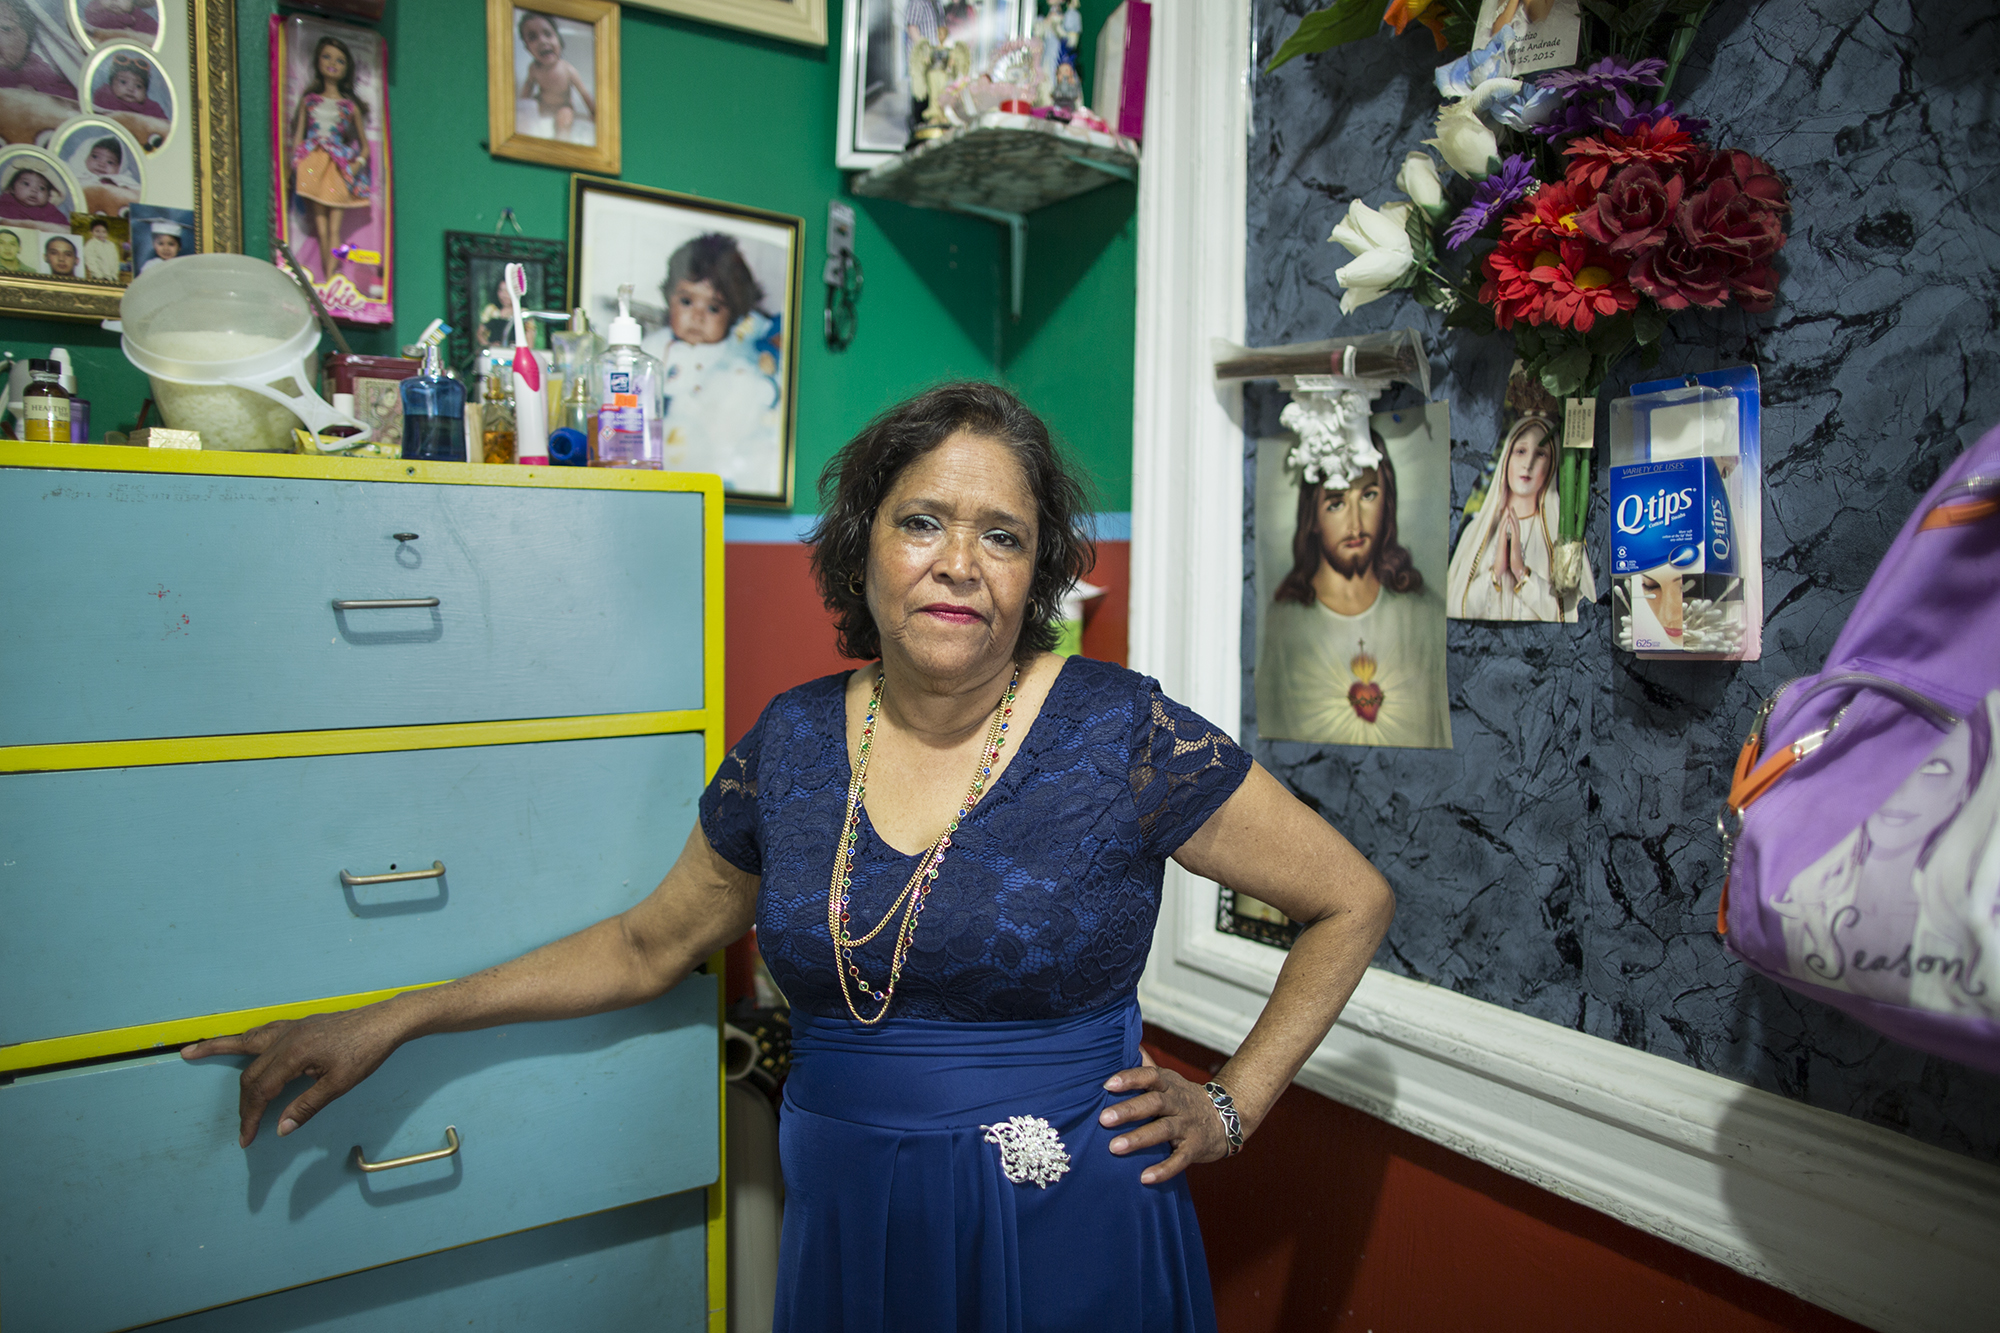  Irma Verduzco is from Morellia, Michoacán, México. She came to New York 26 years ago, having crossed the border with one of her two children. Actually, she has three jobs: cleaning houses, babysitting, and picking up plastic bottles out on the stree